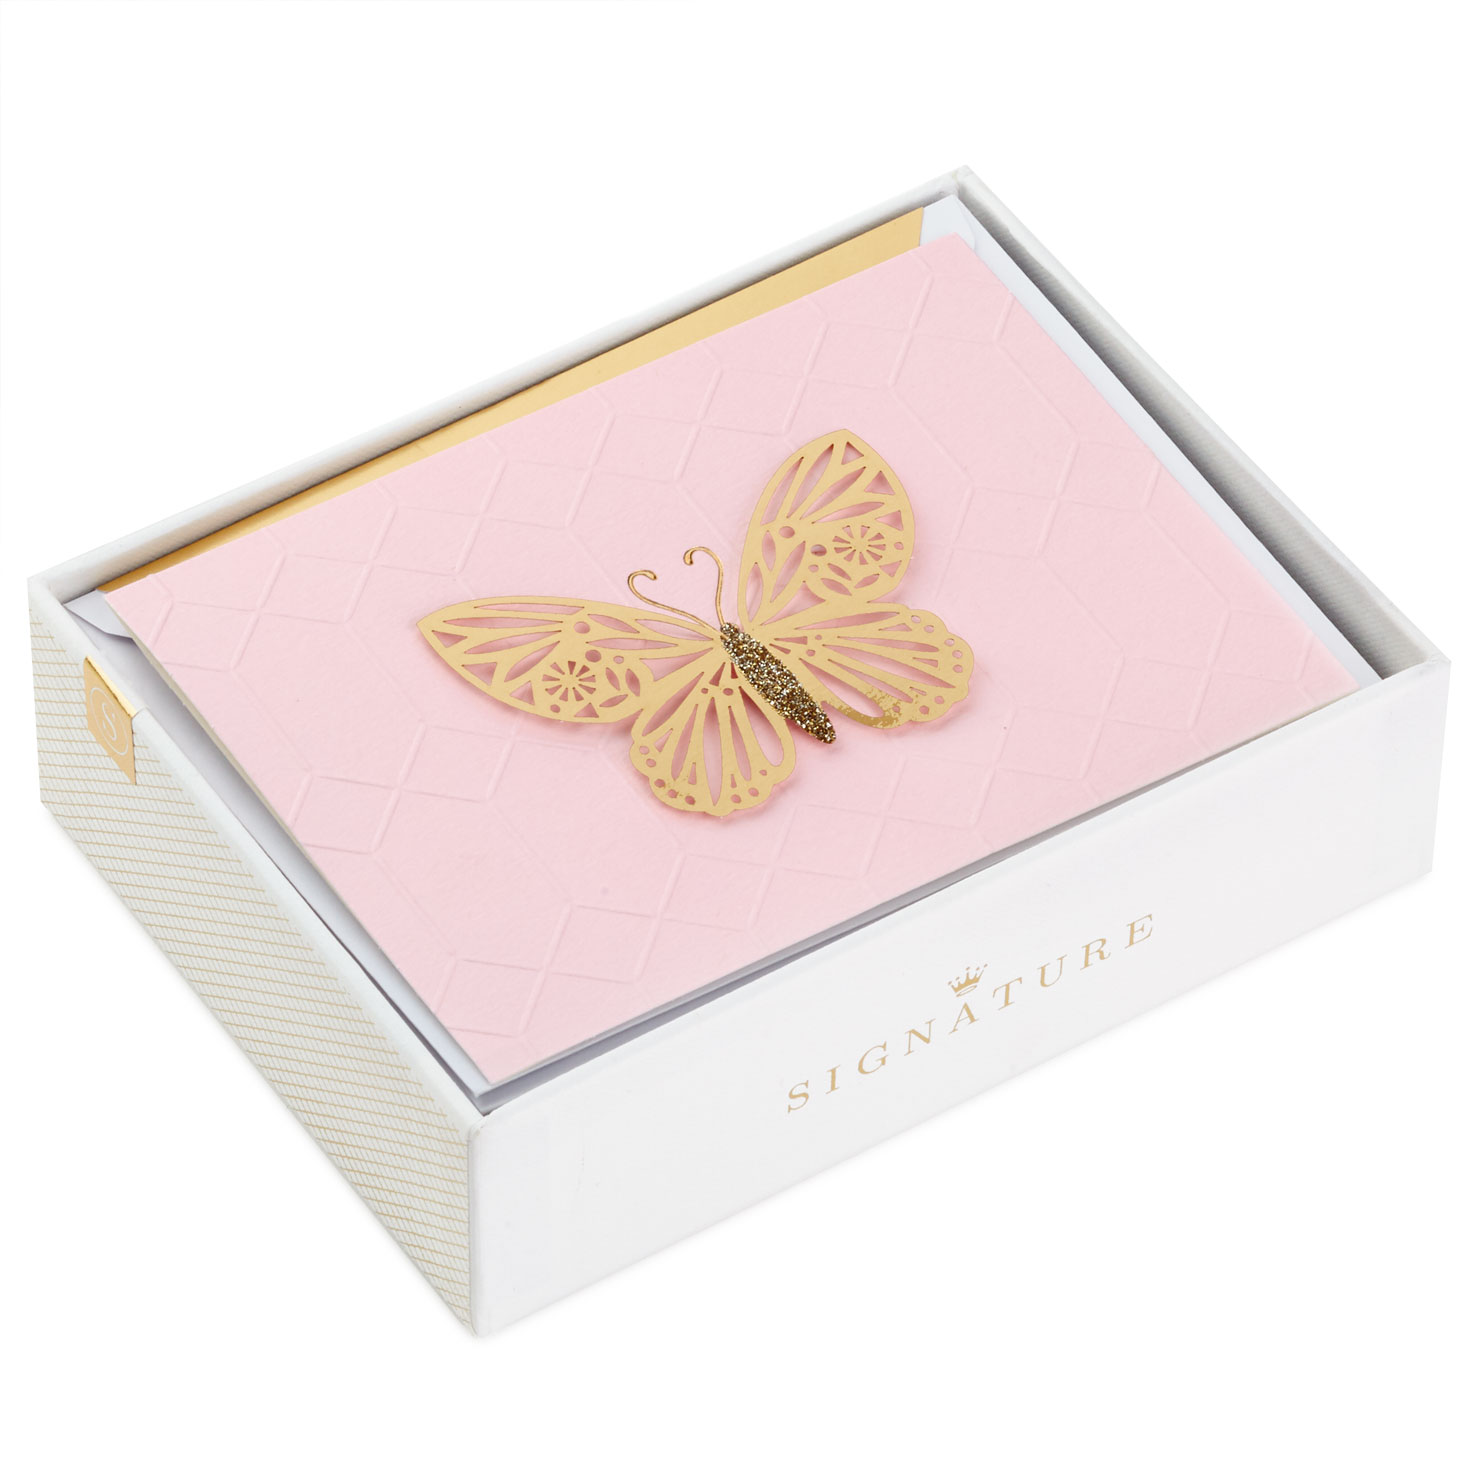 Friendship Butterflies Flowers GOLD SHINE NEW Small Blank Greeting Note Card